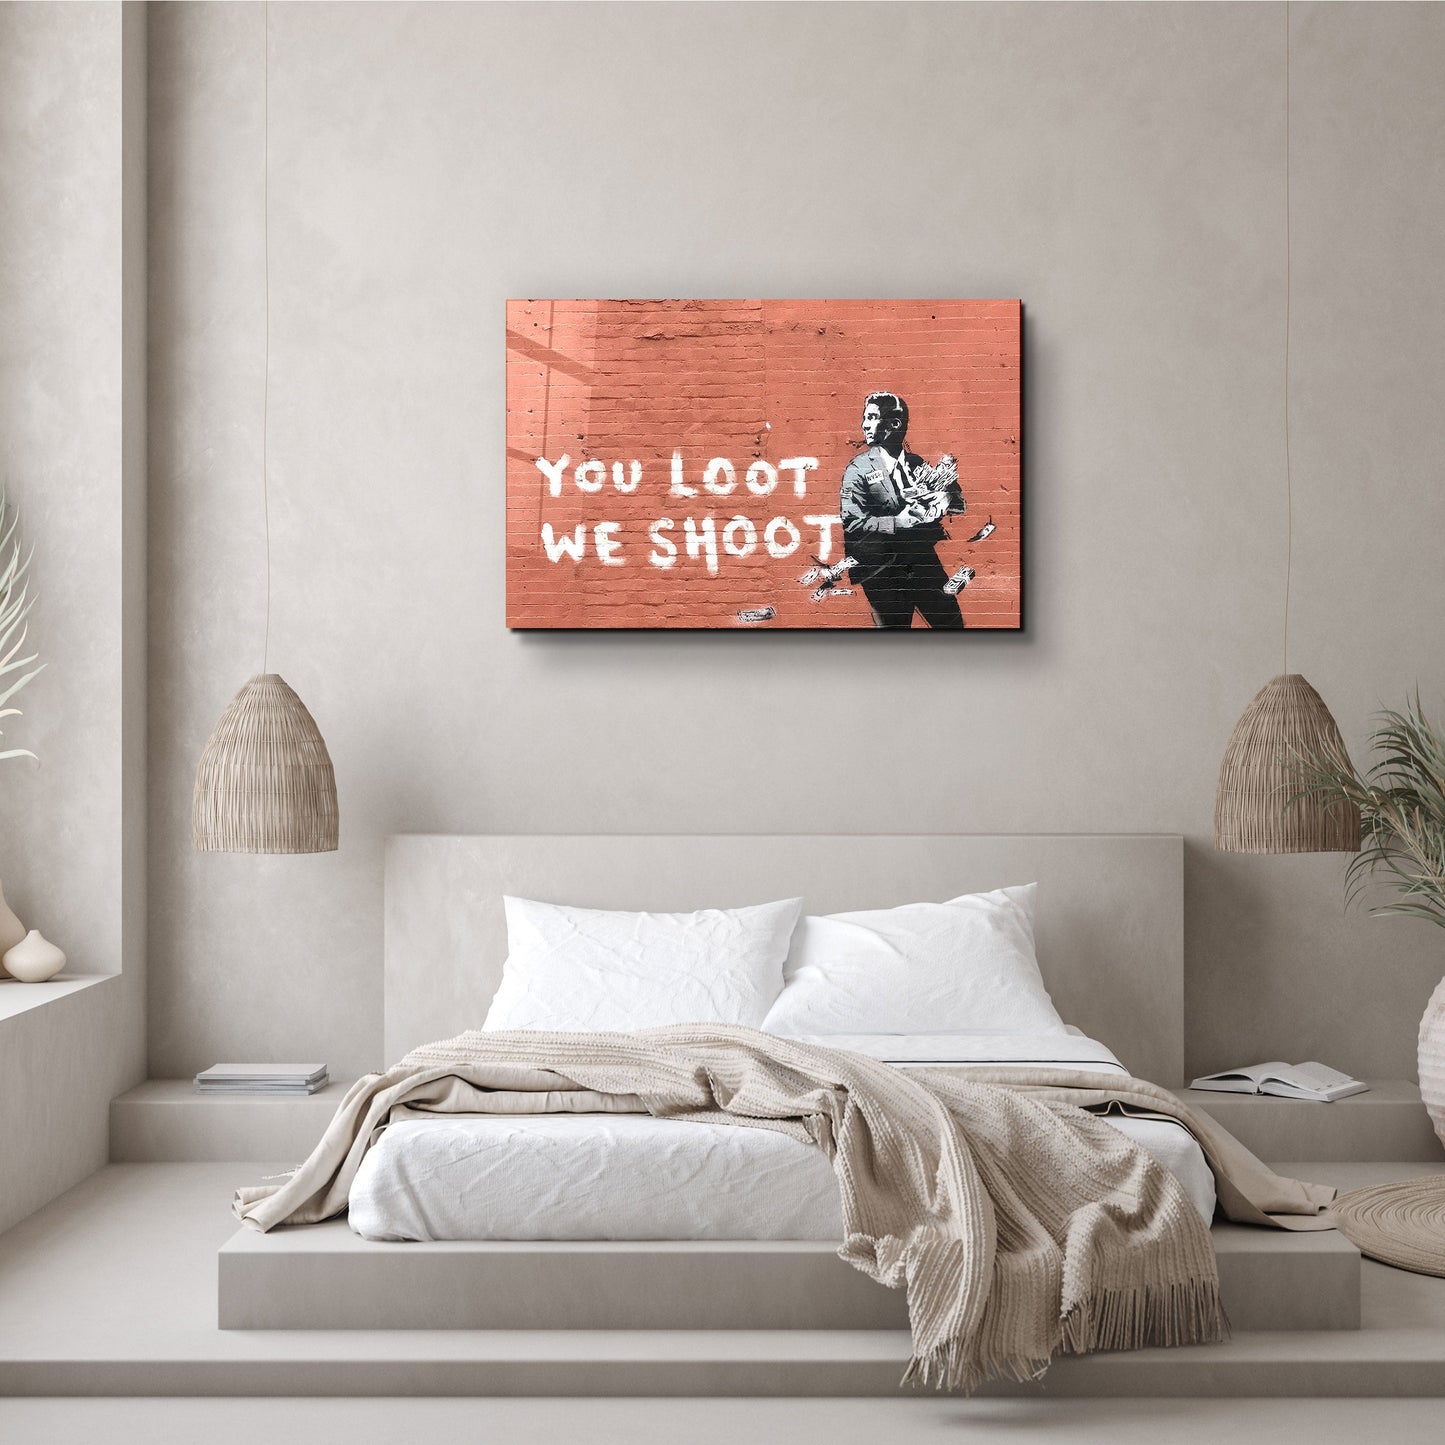 Banksy - You Loot We Shoot - Designer's Collection Glass Wall Art